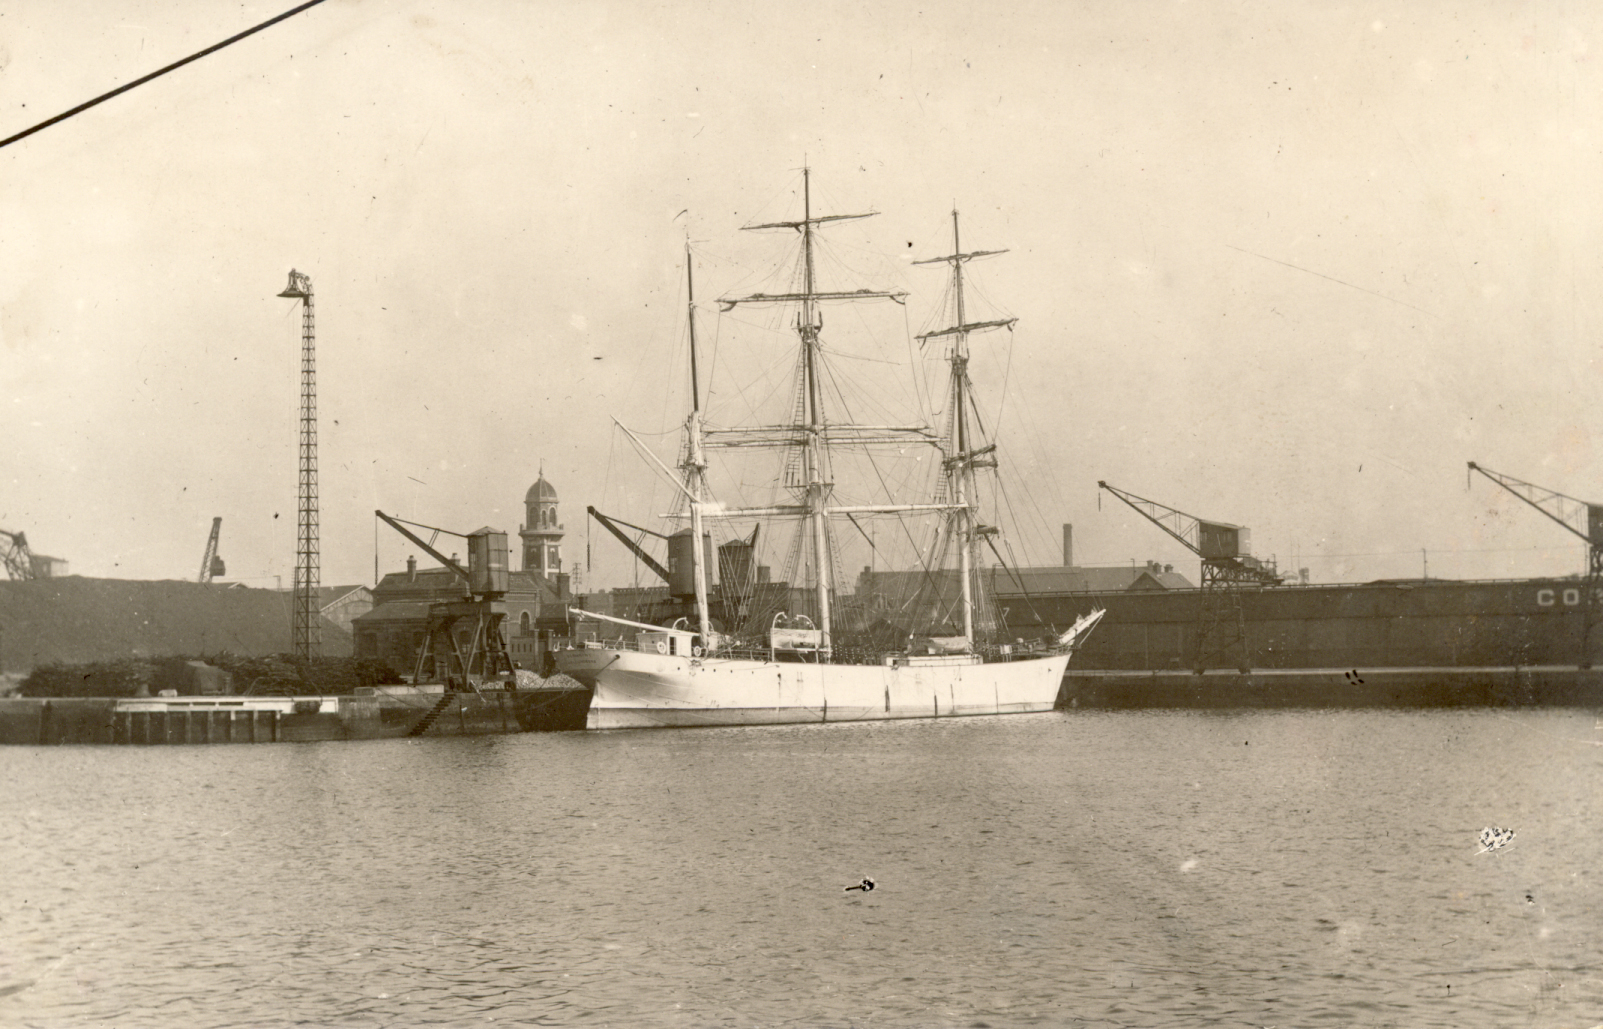 Sundby was engaged on the barque <i>Germaine</i> in 1927 and was part of the ship's voyage to the Virgin Islands in 1928 (Danish Maritime Museum)